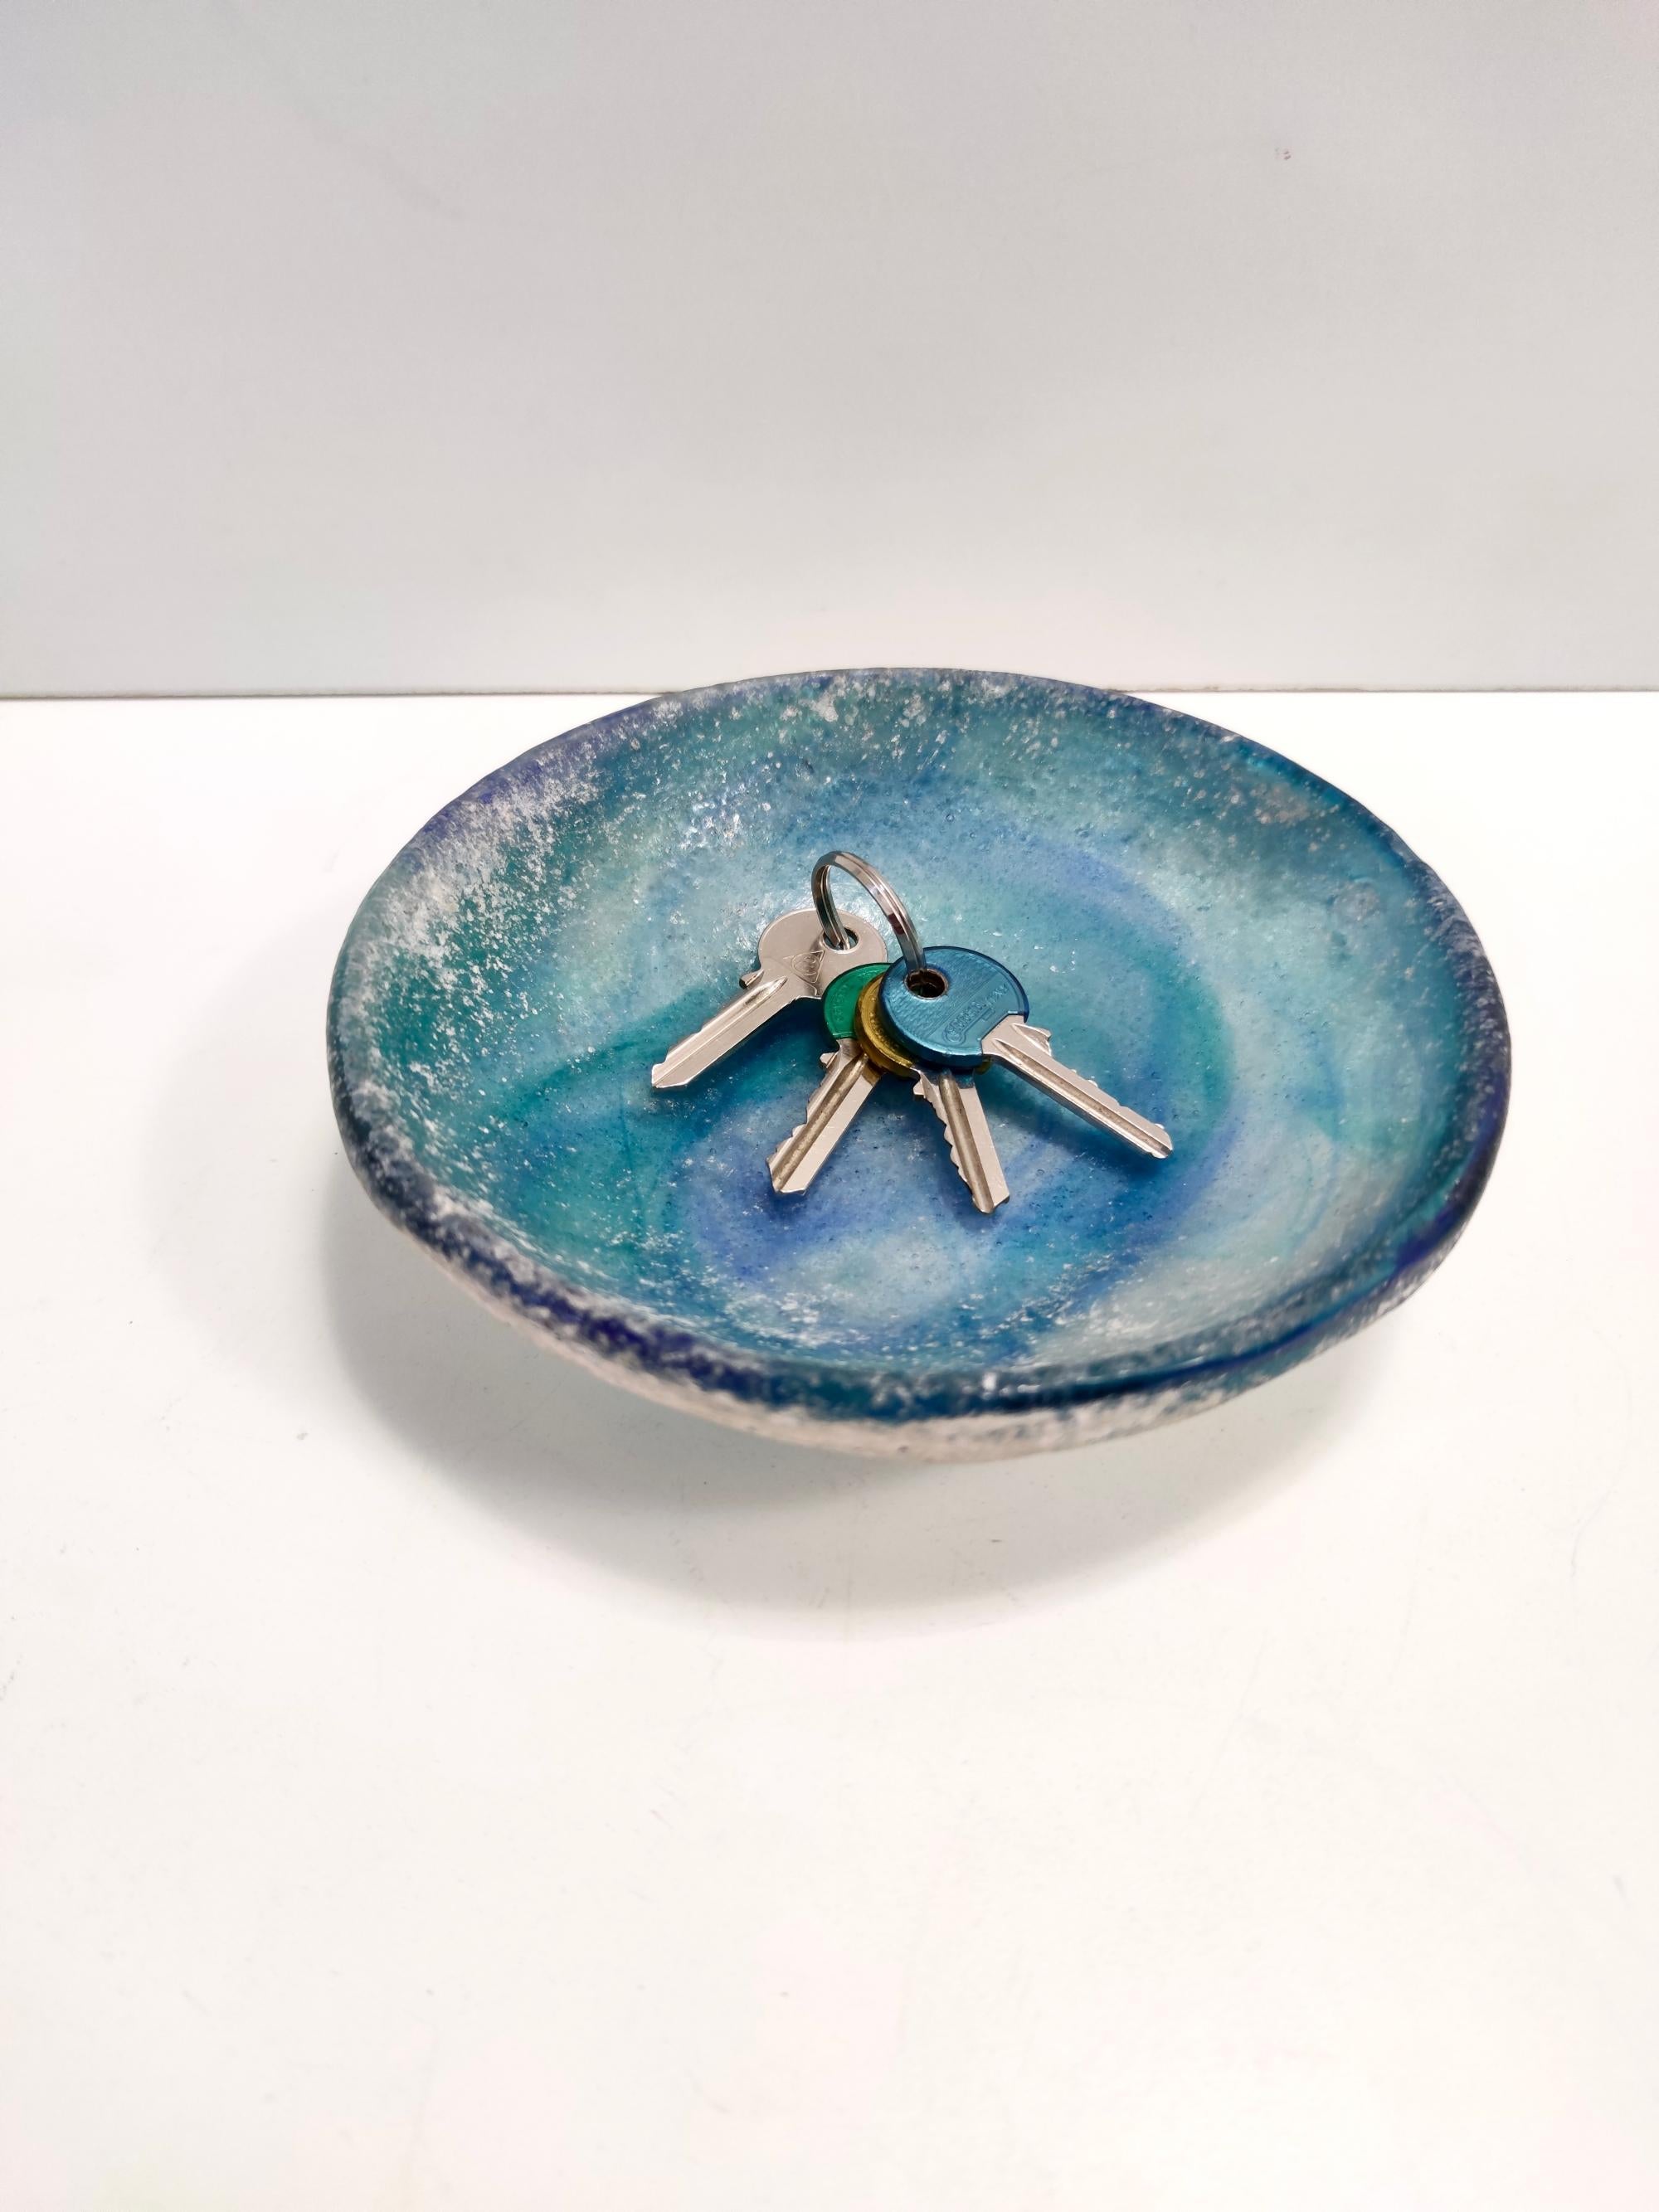 Made in Italy, 1960s - 1970s. 
This bowl / ashtray / vide-poche is made in polychromed blue scavo hand-blown Murano glass.
It is a vintage piece, therefore it might show slight traces of use, but it can be considered as in perfect original condition